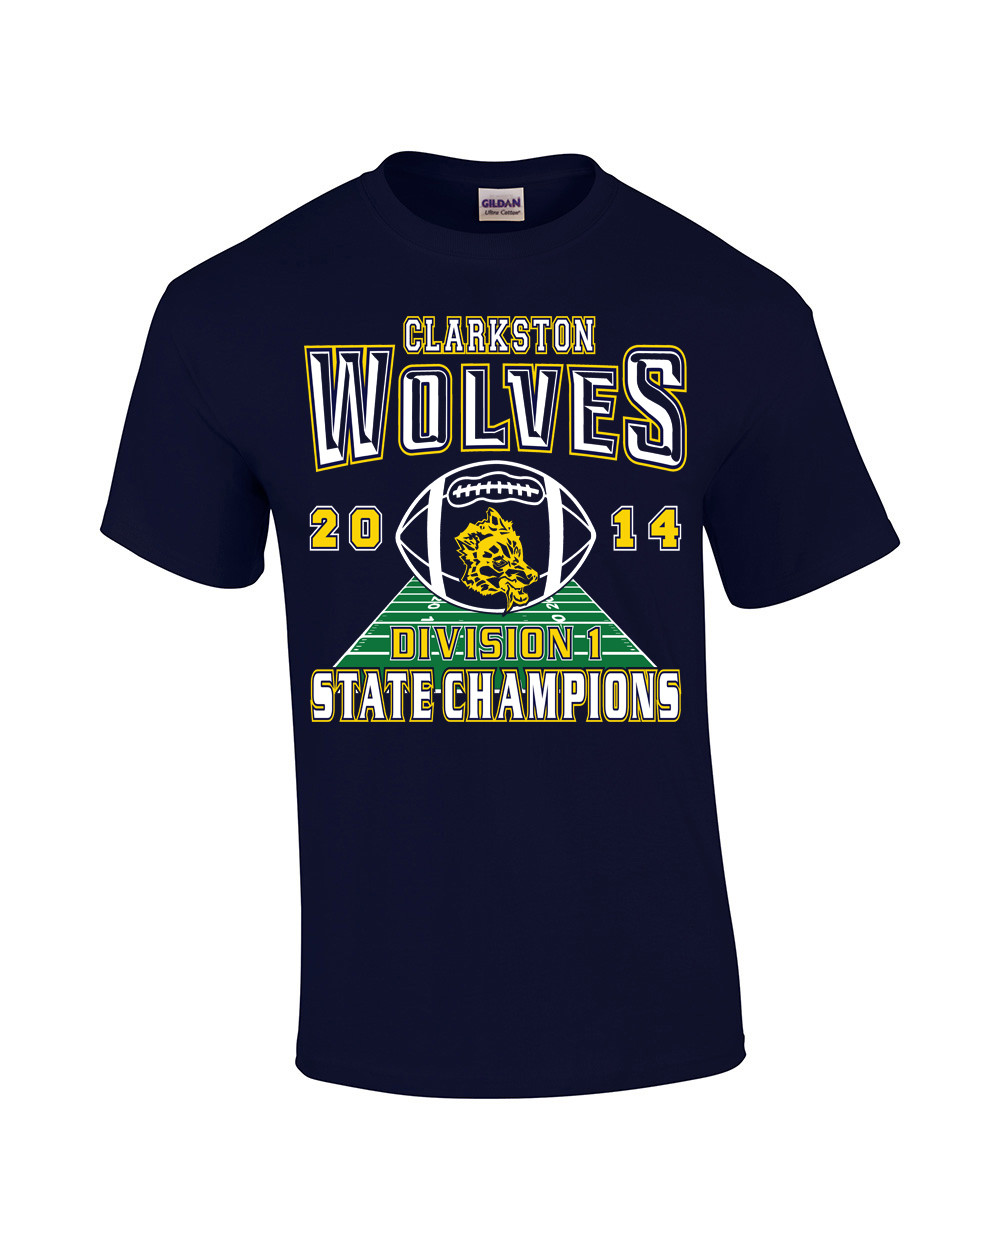 New championship T-shirt design available